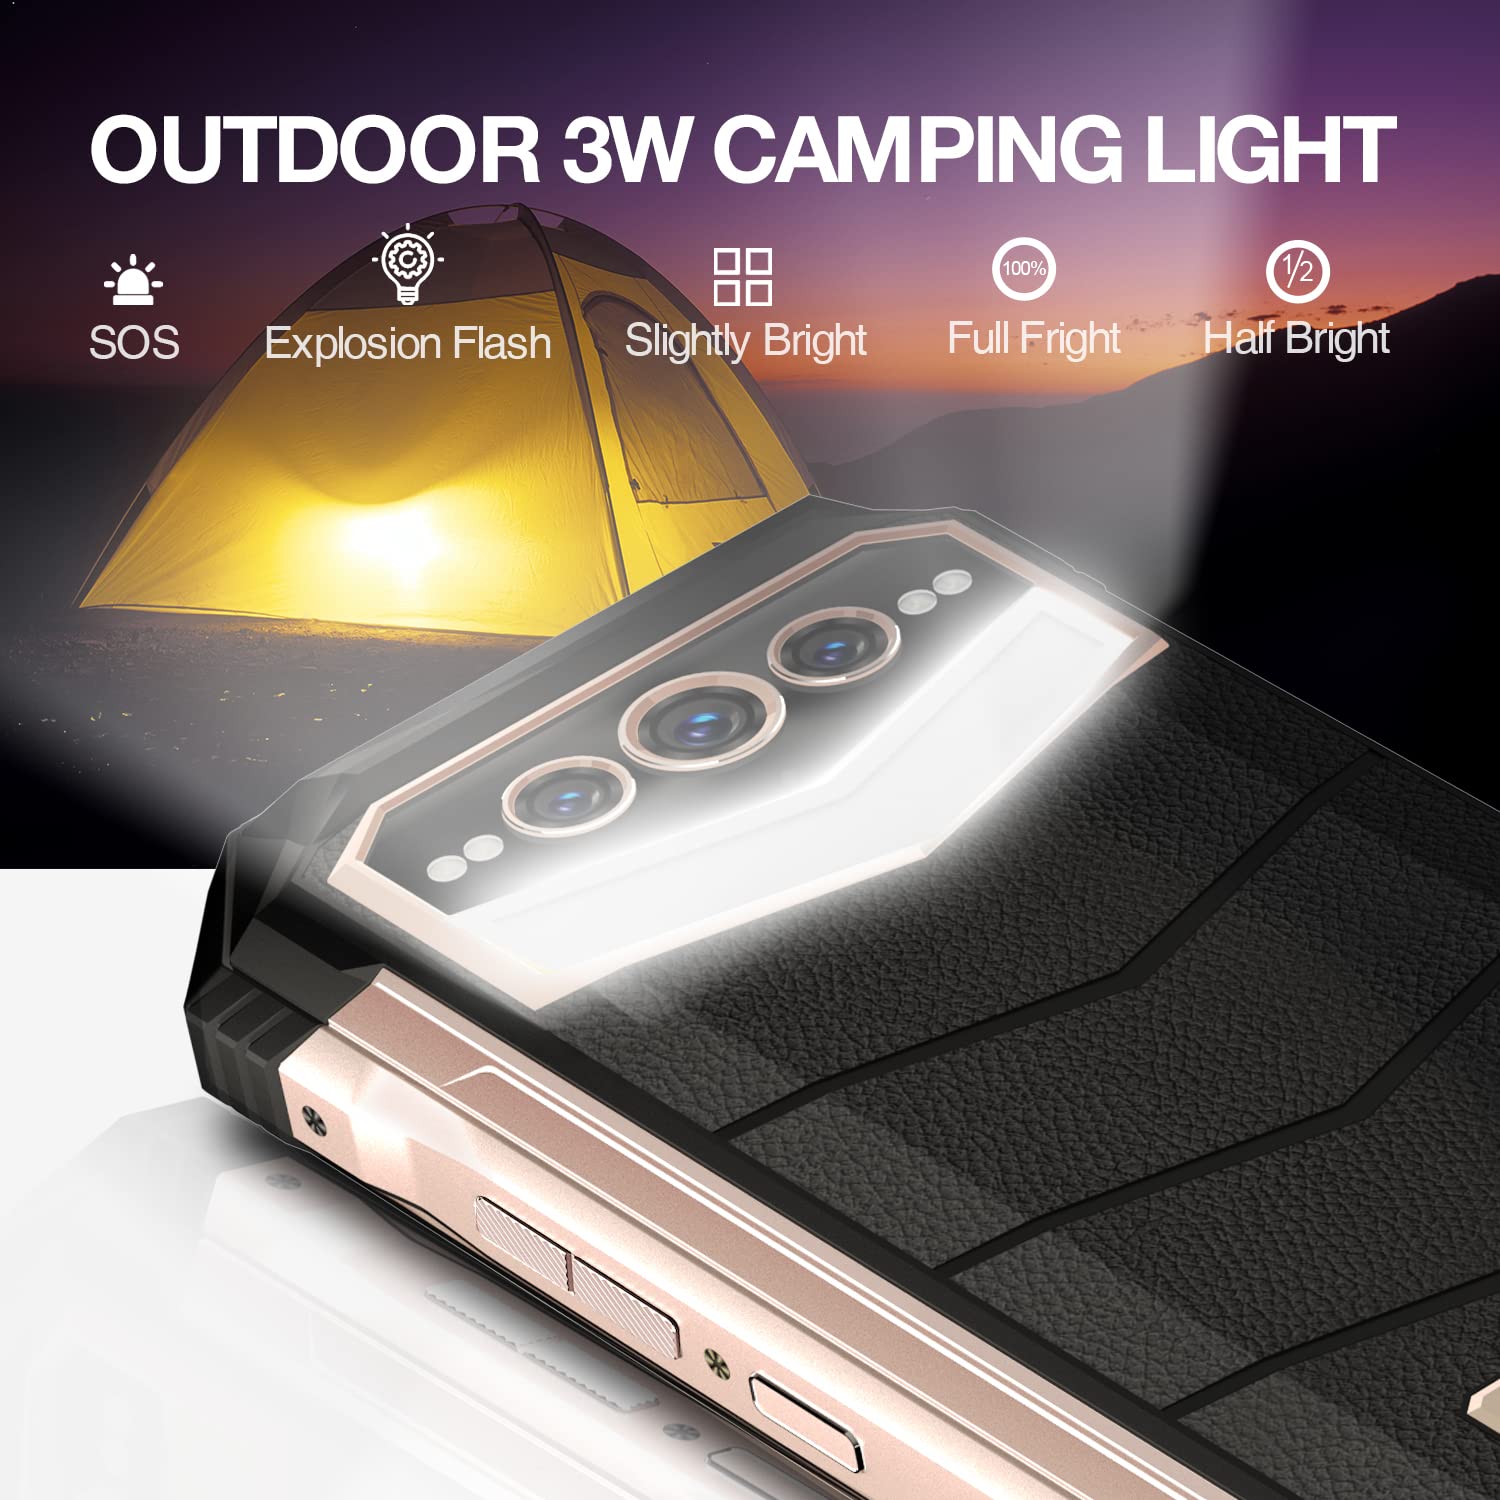 DOOGEE S100 PRO (2023) Rugged Smartphone with 130LM Camping Light, 22000mAh 20GB+256GB 4G Phones Unlocked, 120Hz Android 12 Rugged Phone, Dual Hi-res Speakers, 108MP Tri Camera, Night Vision, NFC, OTG